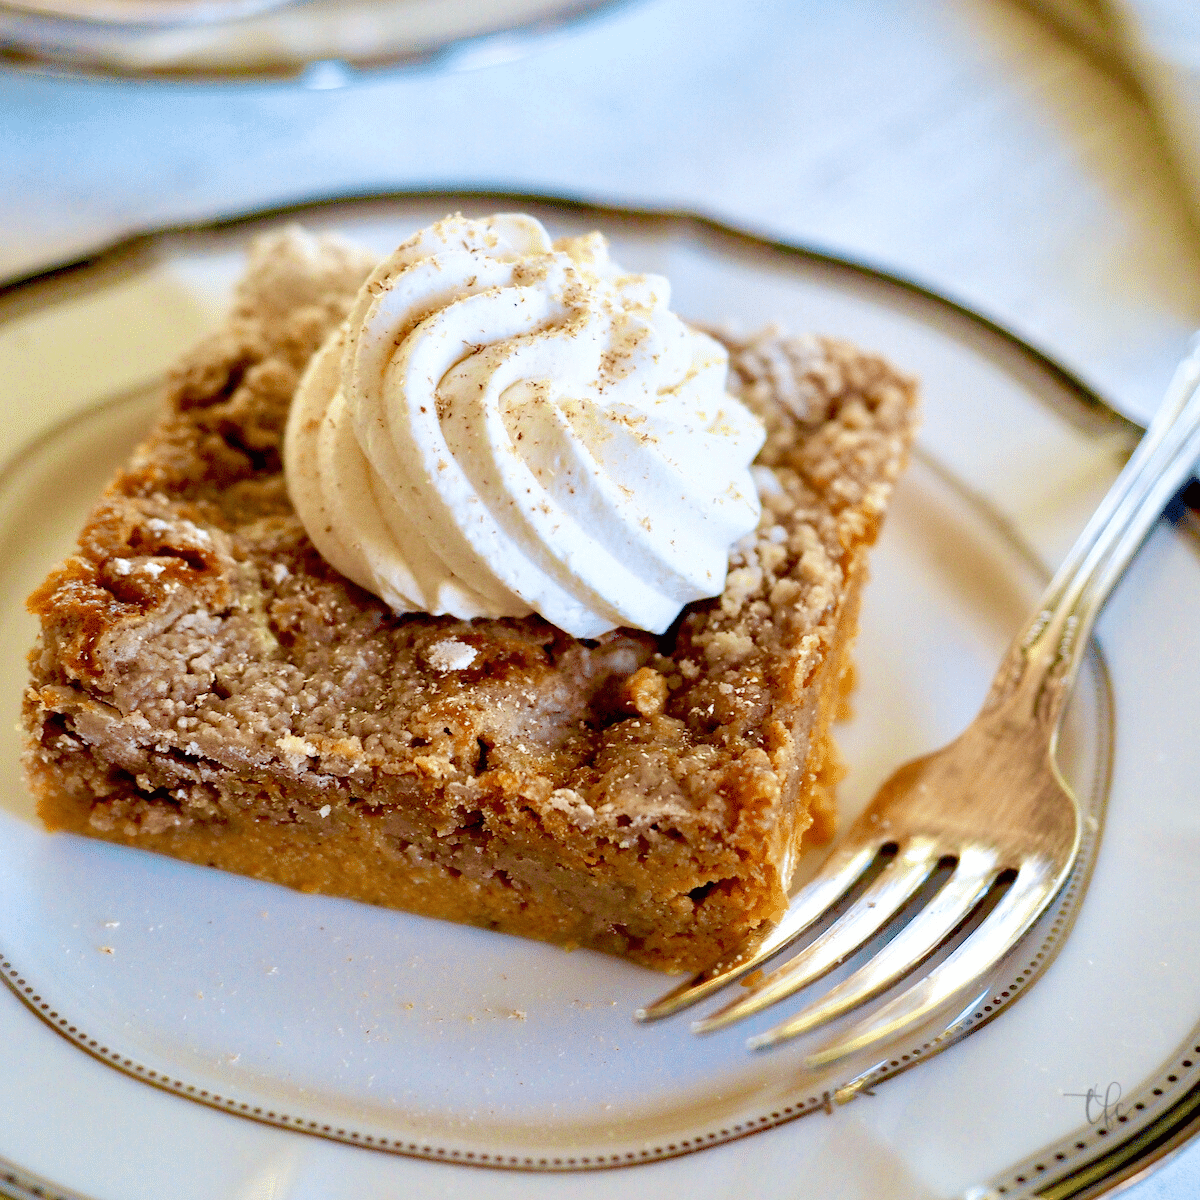 Easy pumpkin pie dump cake with square of cake on plate with a swirl of whipped cream, topped with fresh nutmeg.